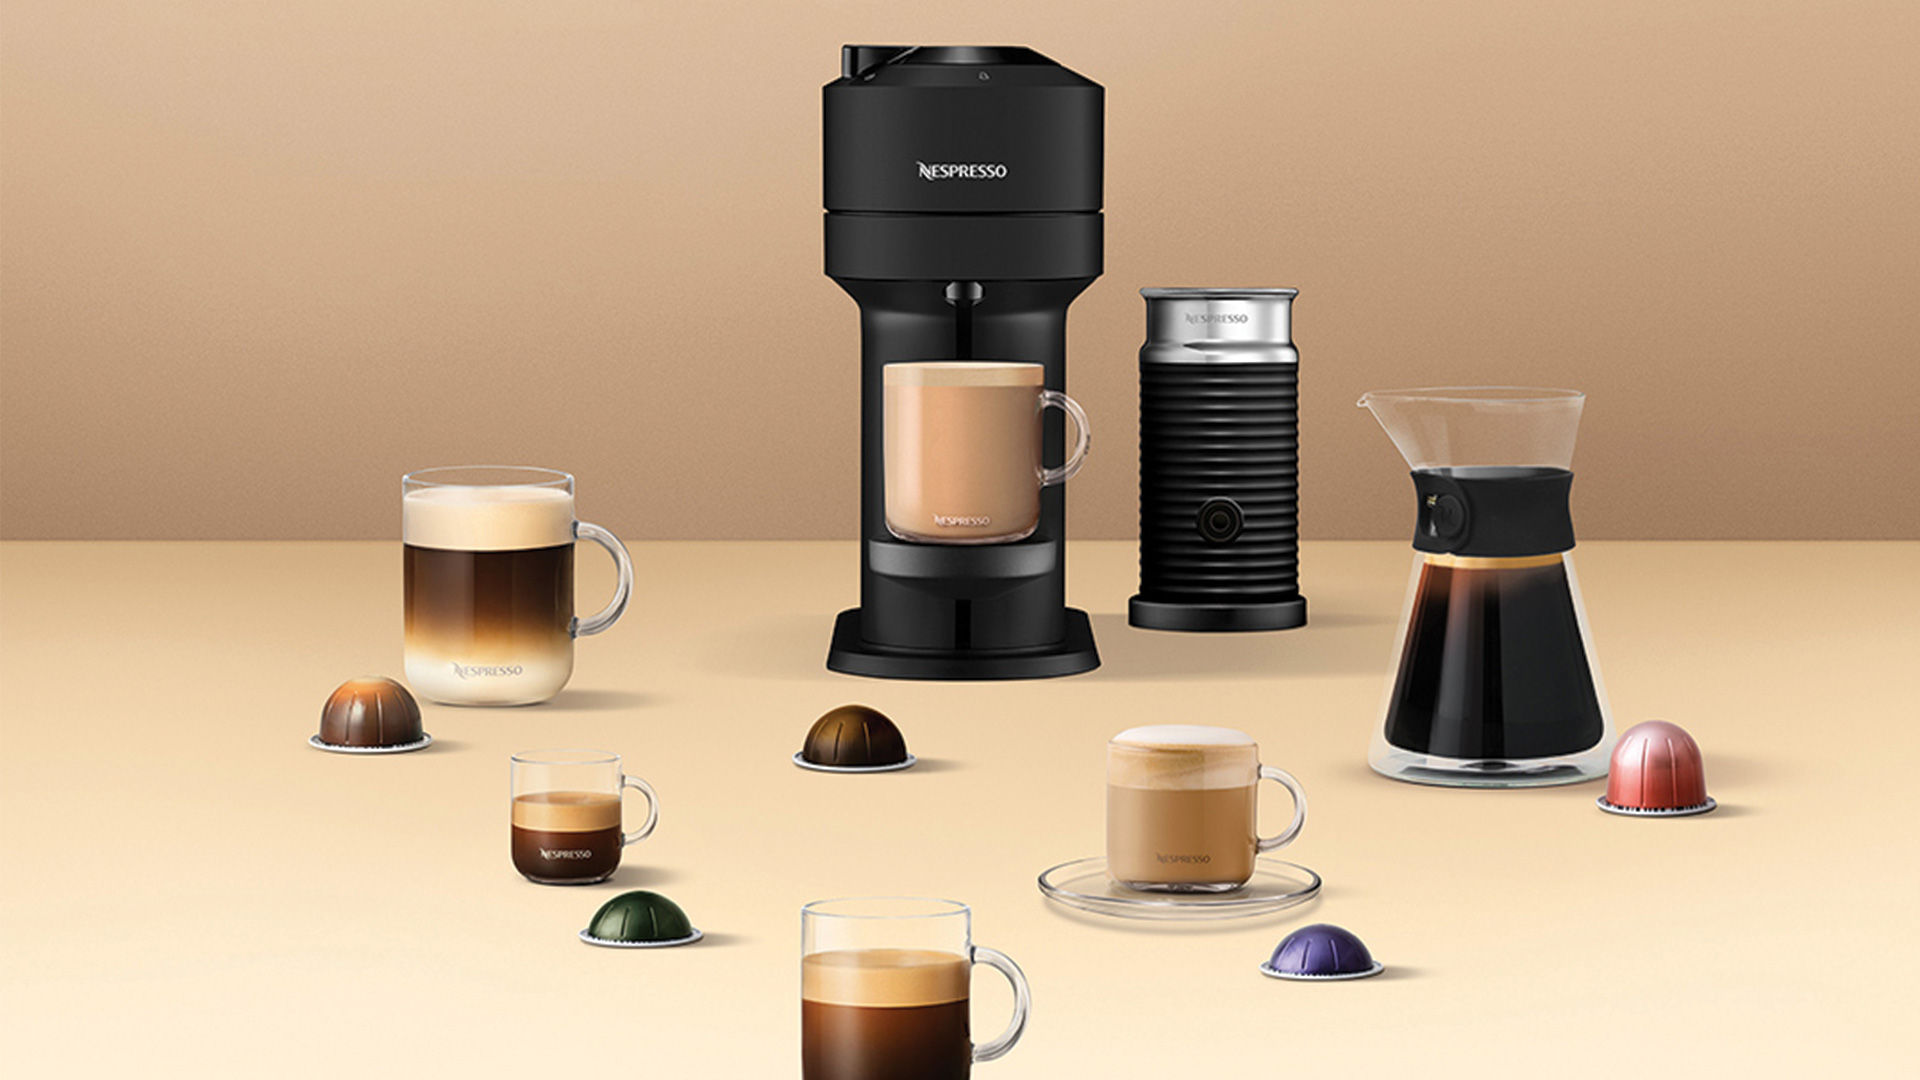 Delivering a Next Level Brew With the Nespresso Vertuo